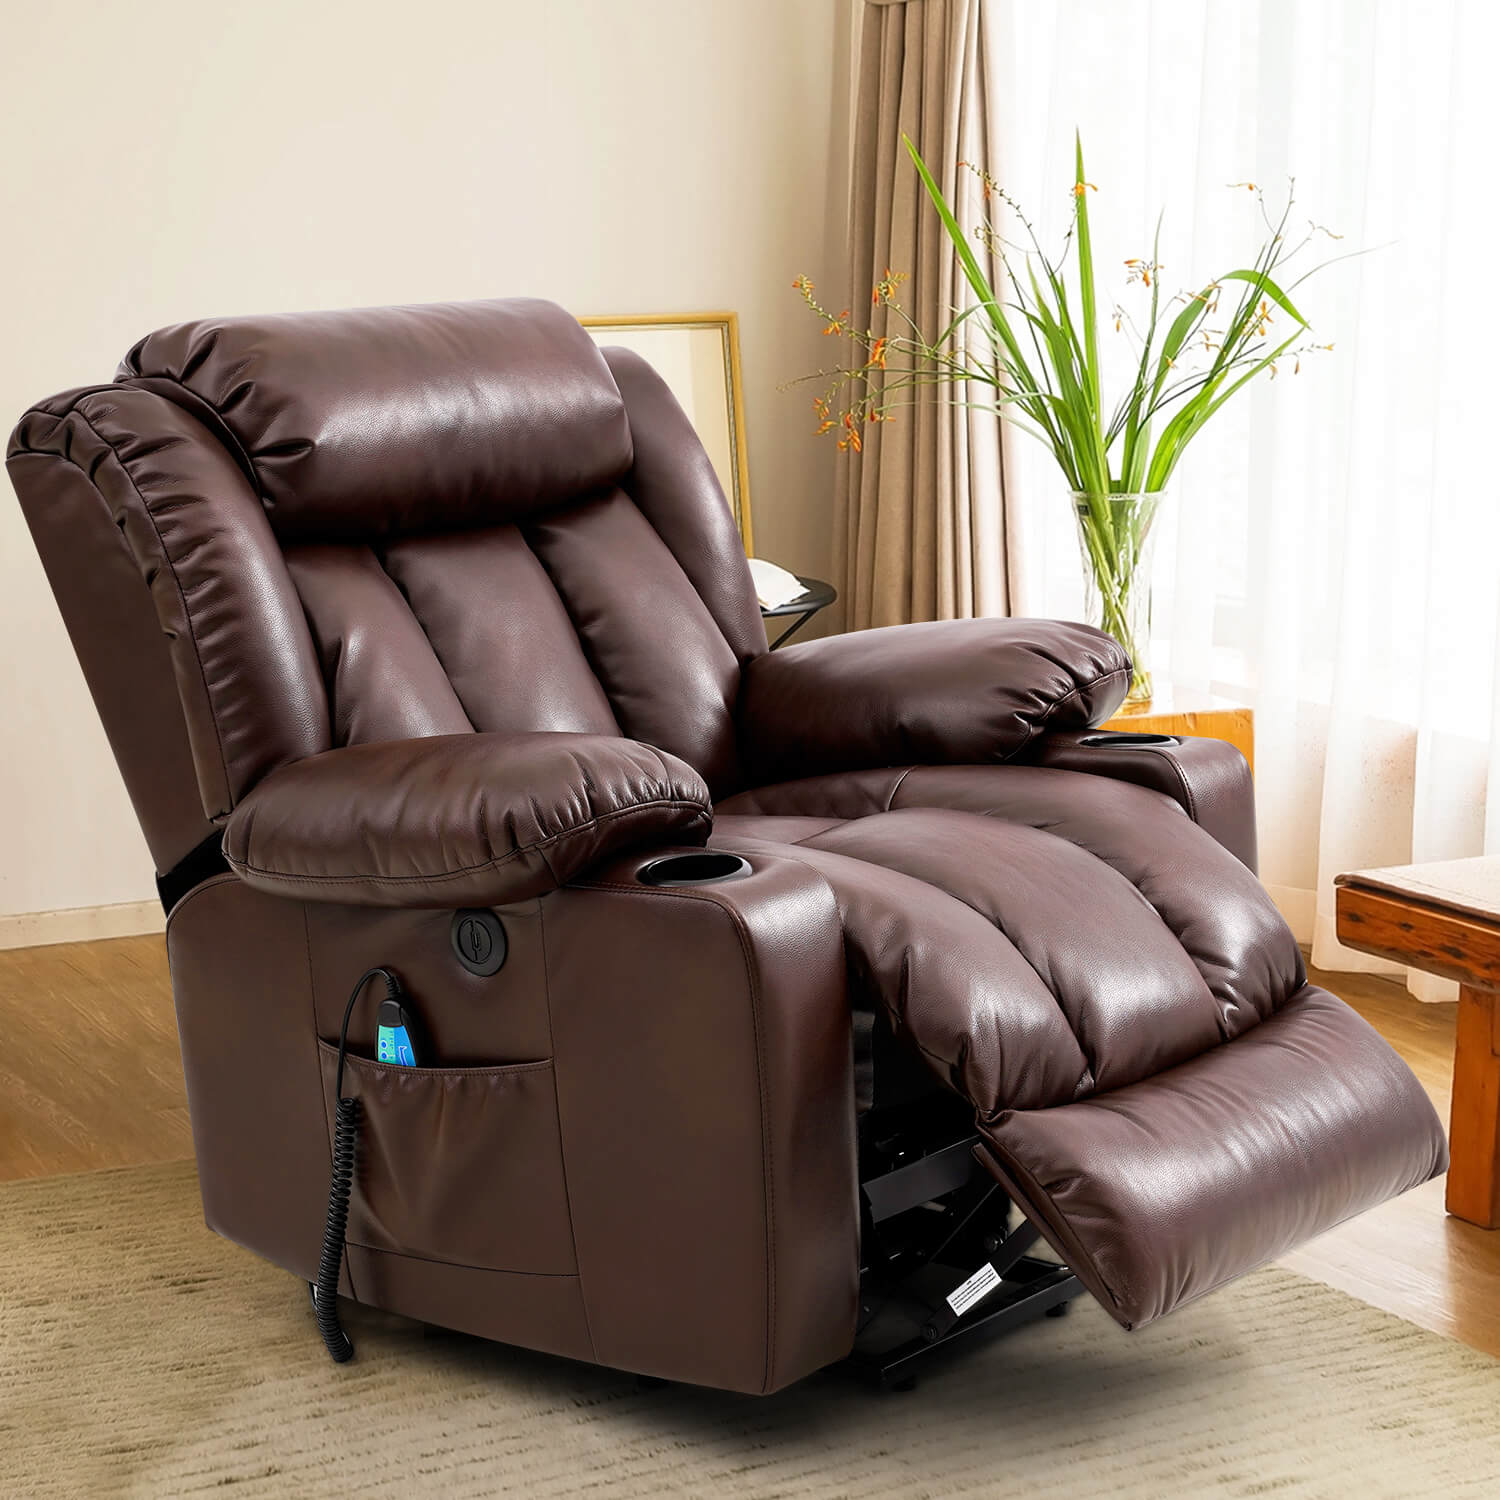 Soulout large lift recliner chair for the elderly brown